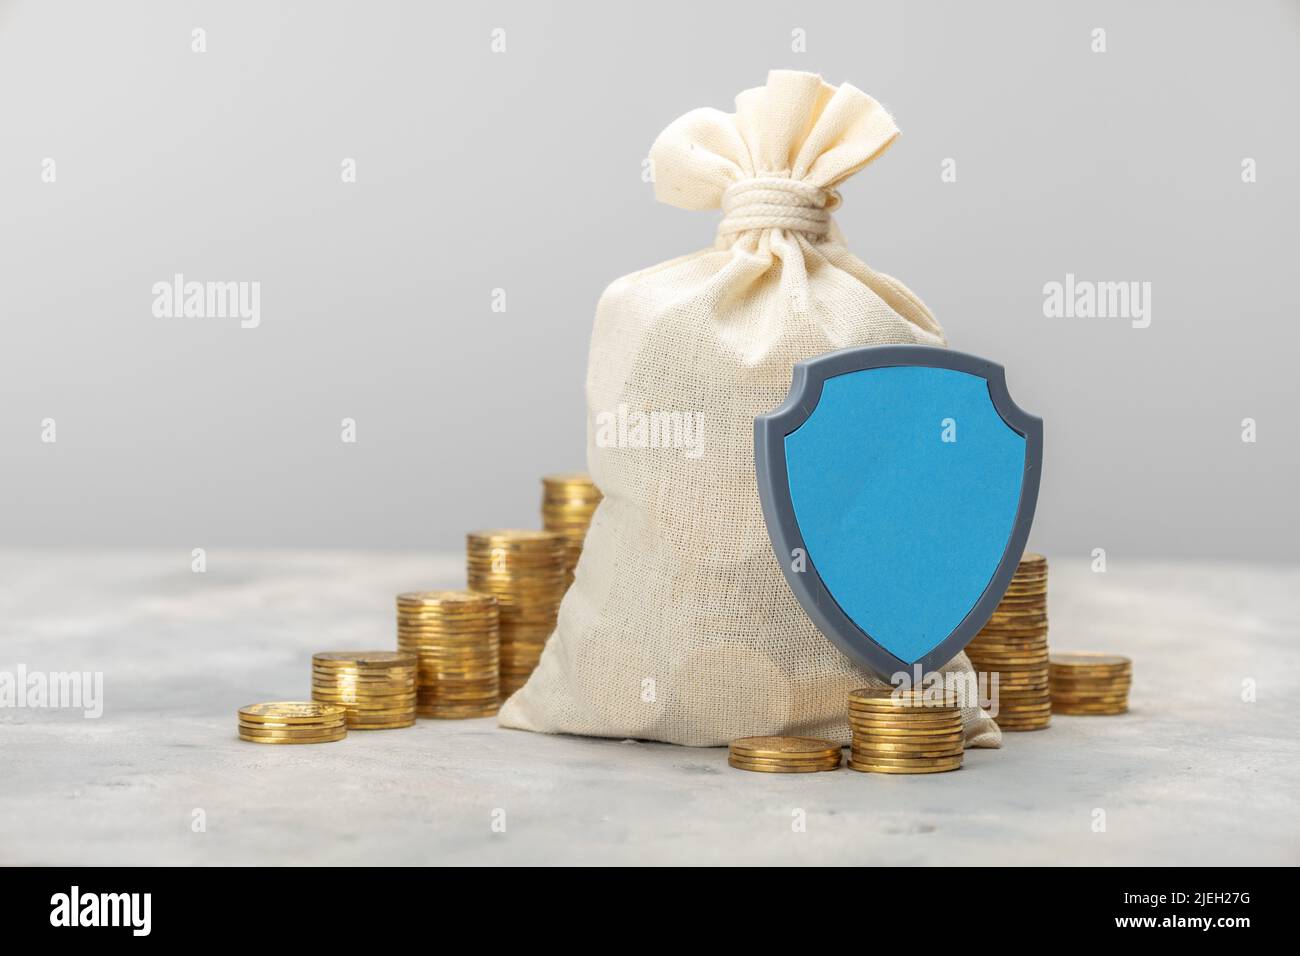 Money bag and a stack of gold coins with a shield. Savings insurance concept. Stock Photo